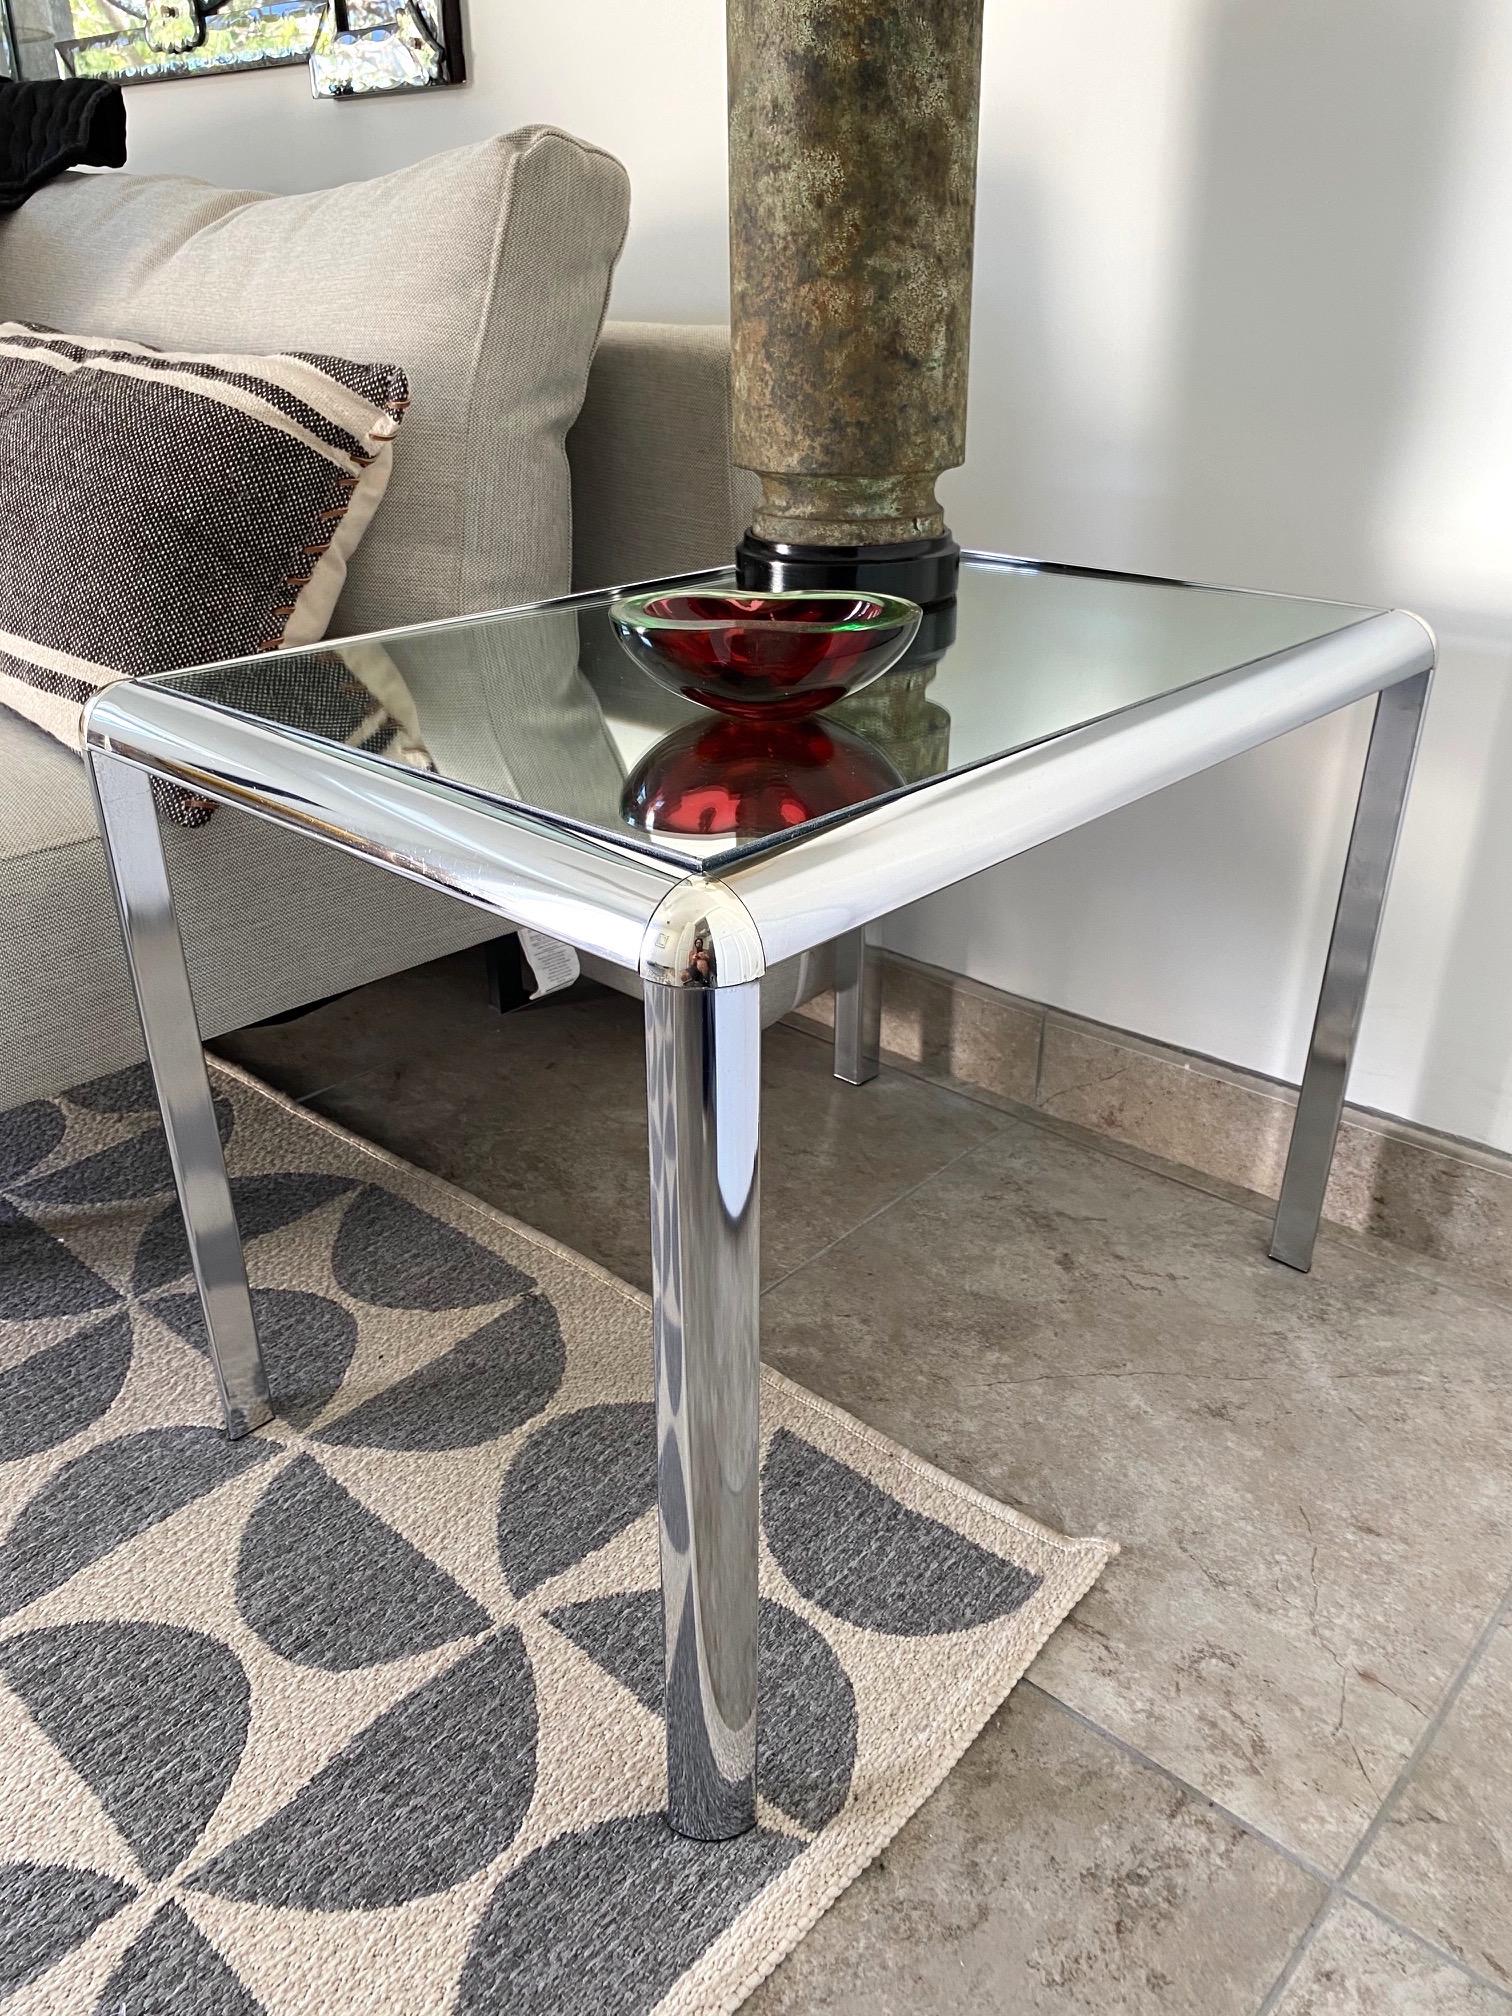 Pair of Mid-Century Modern Chrome Side Tables with Mirrored Tops, c. 1970's In Good Condition For Sale In Fort Lauderdale, FL